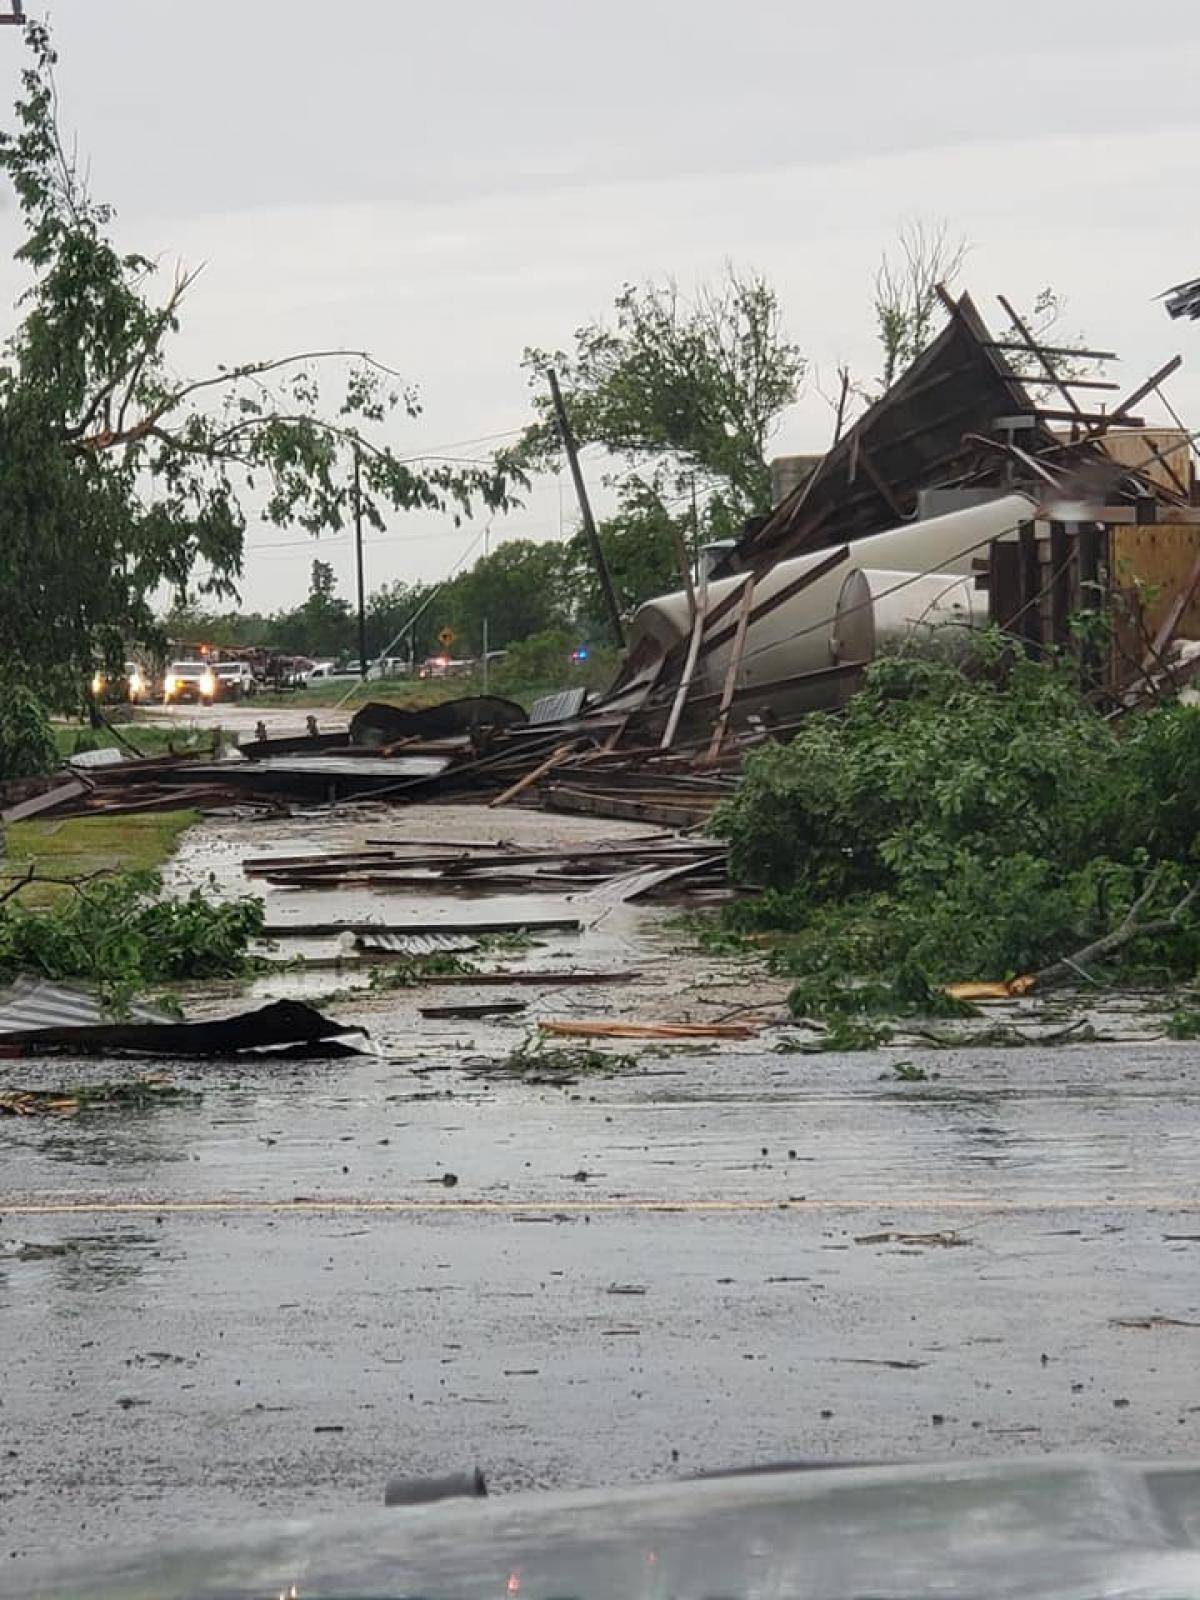 Debris seen in the aftermath of a tornado in Franklin, Texas, U.S., in this image from social media